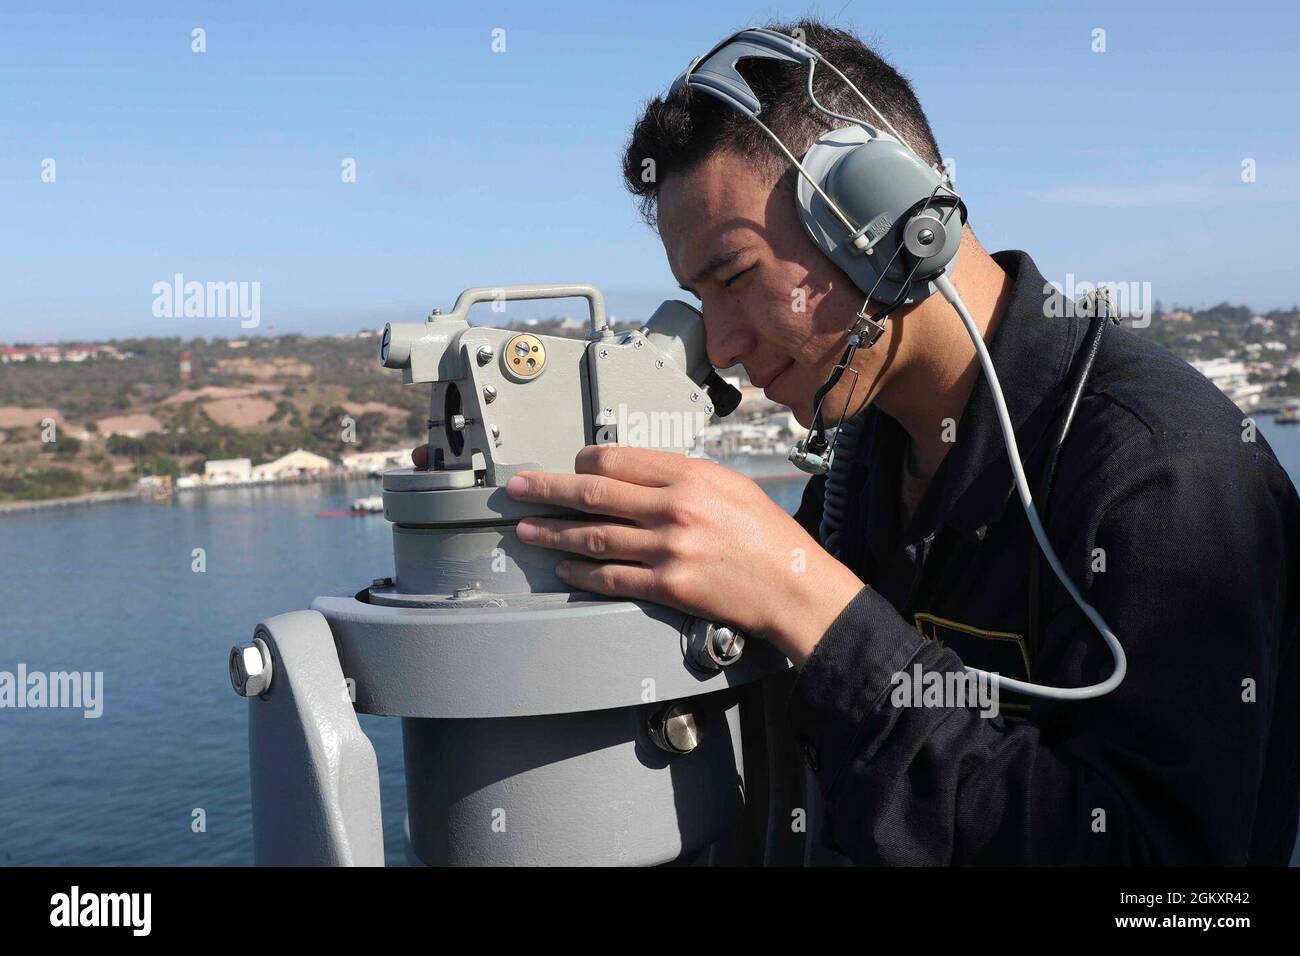 210721-N-CM110-1048 PACIFIC OCEAN (July 21, 2021) – Quartermaster Seaman Kyle Williams, from Pensacola, Fla., uses a telescopic alidade to plot the ship’s position aboard amphibious assault ship USS Tripoli (LHA 7), July21. Tripoli is underway conducting routine operations in U.S. 3rd Fleet. Stock Photo